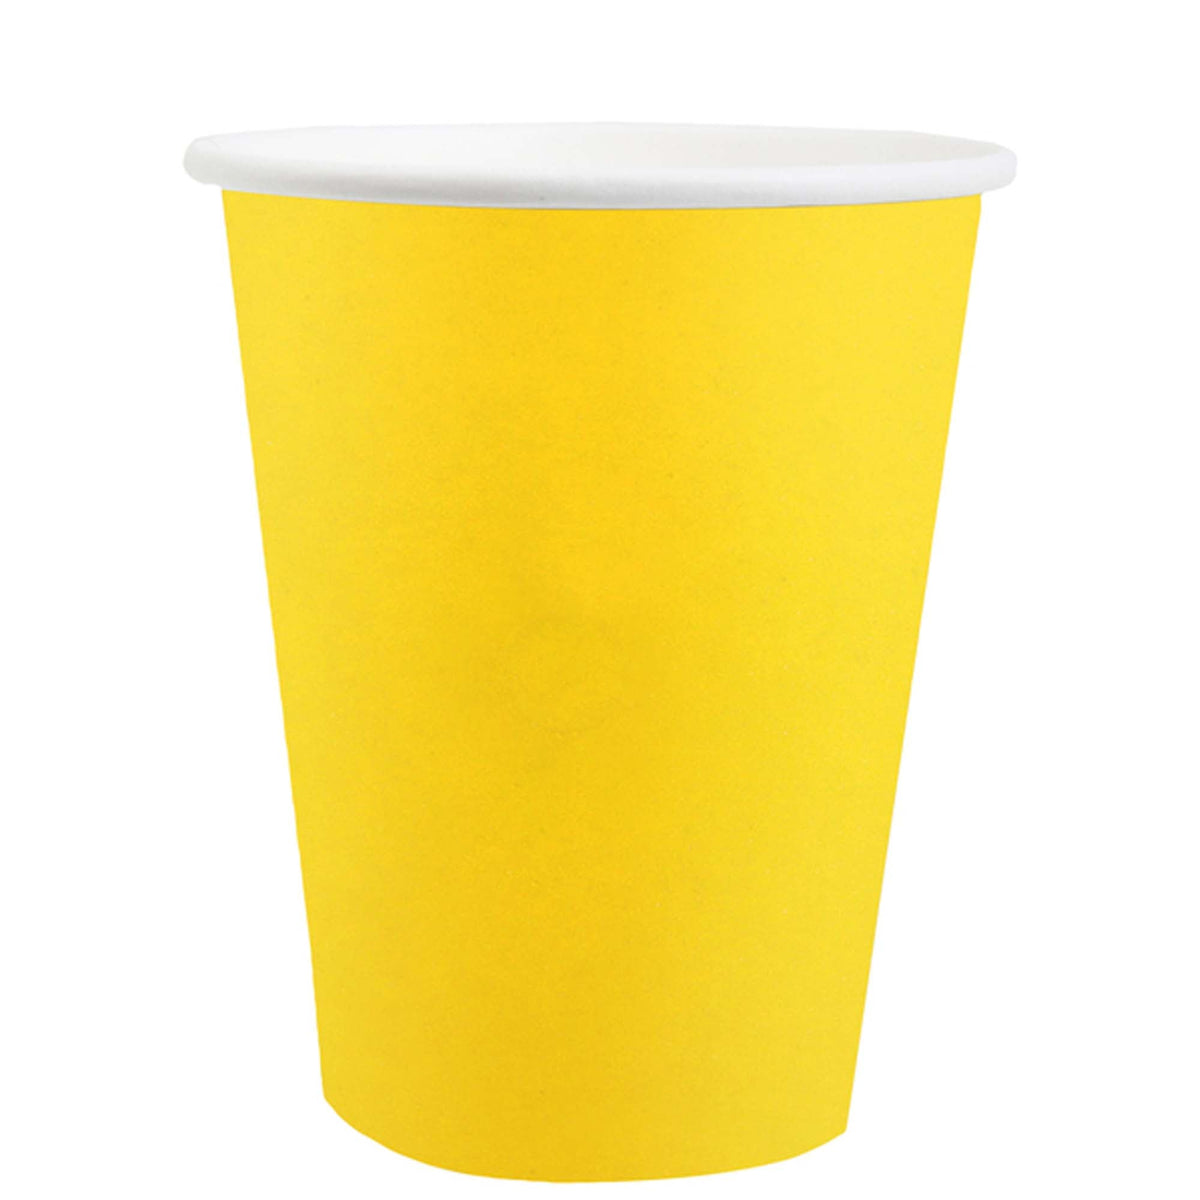 SANTEX Everyday Entertaining Yellow Party Paper Cups, 9 Oz, 10 Count 3660380072836